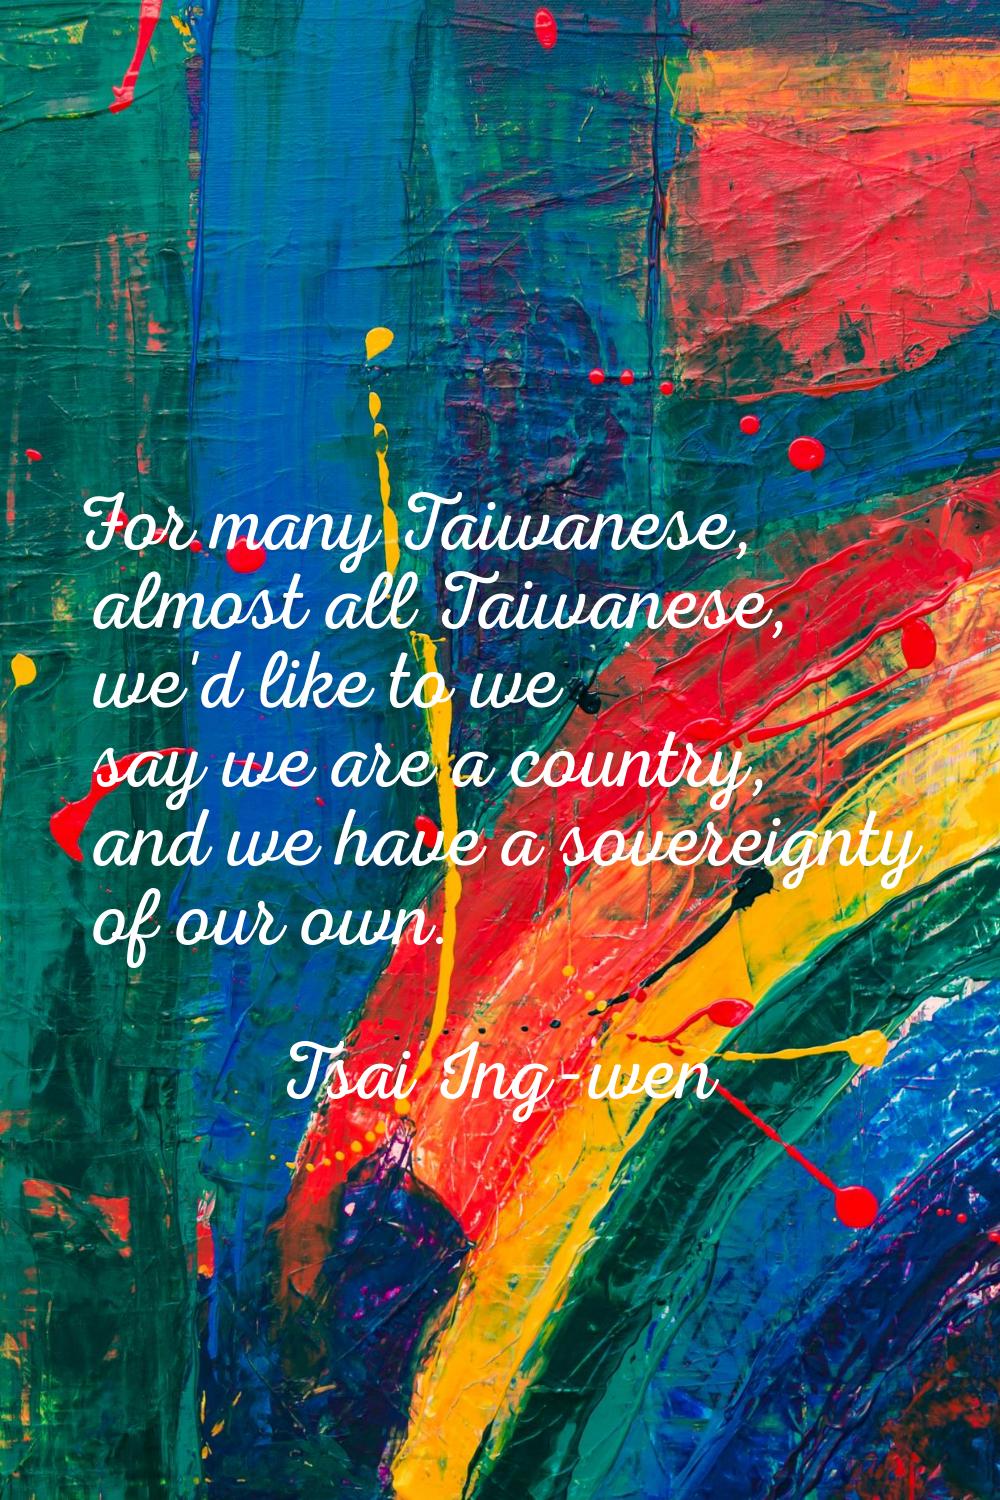 For many Taiwanese, almost all Taiwanese, we'd like to we say we are a country, and we have a sover